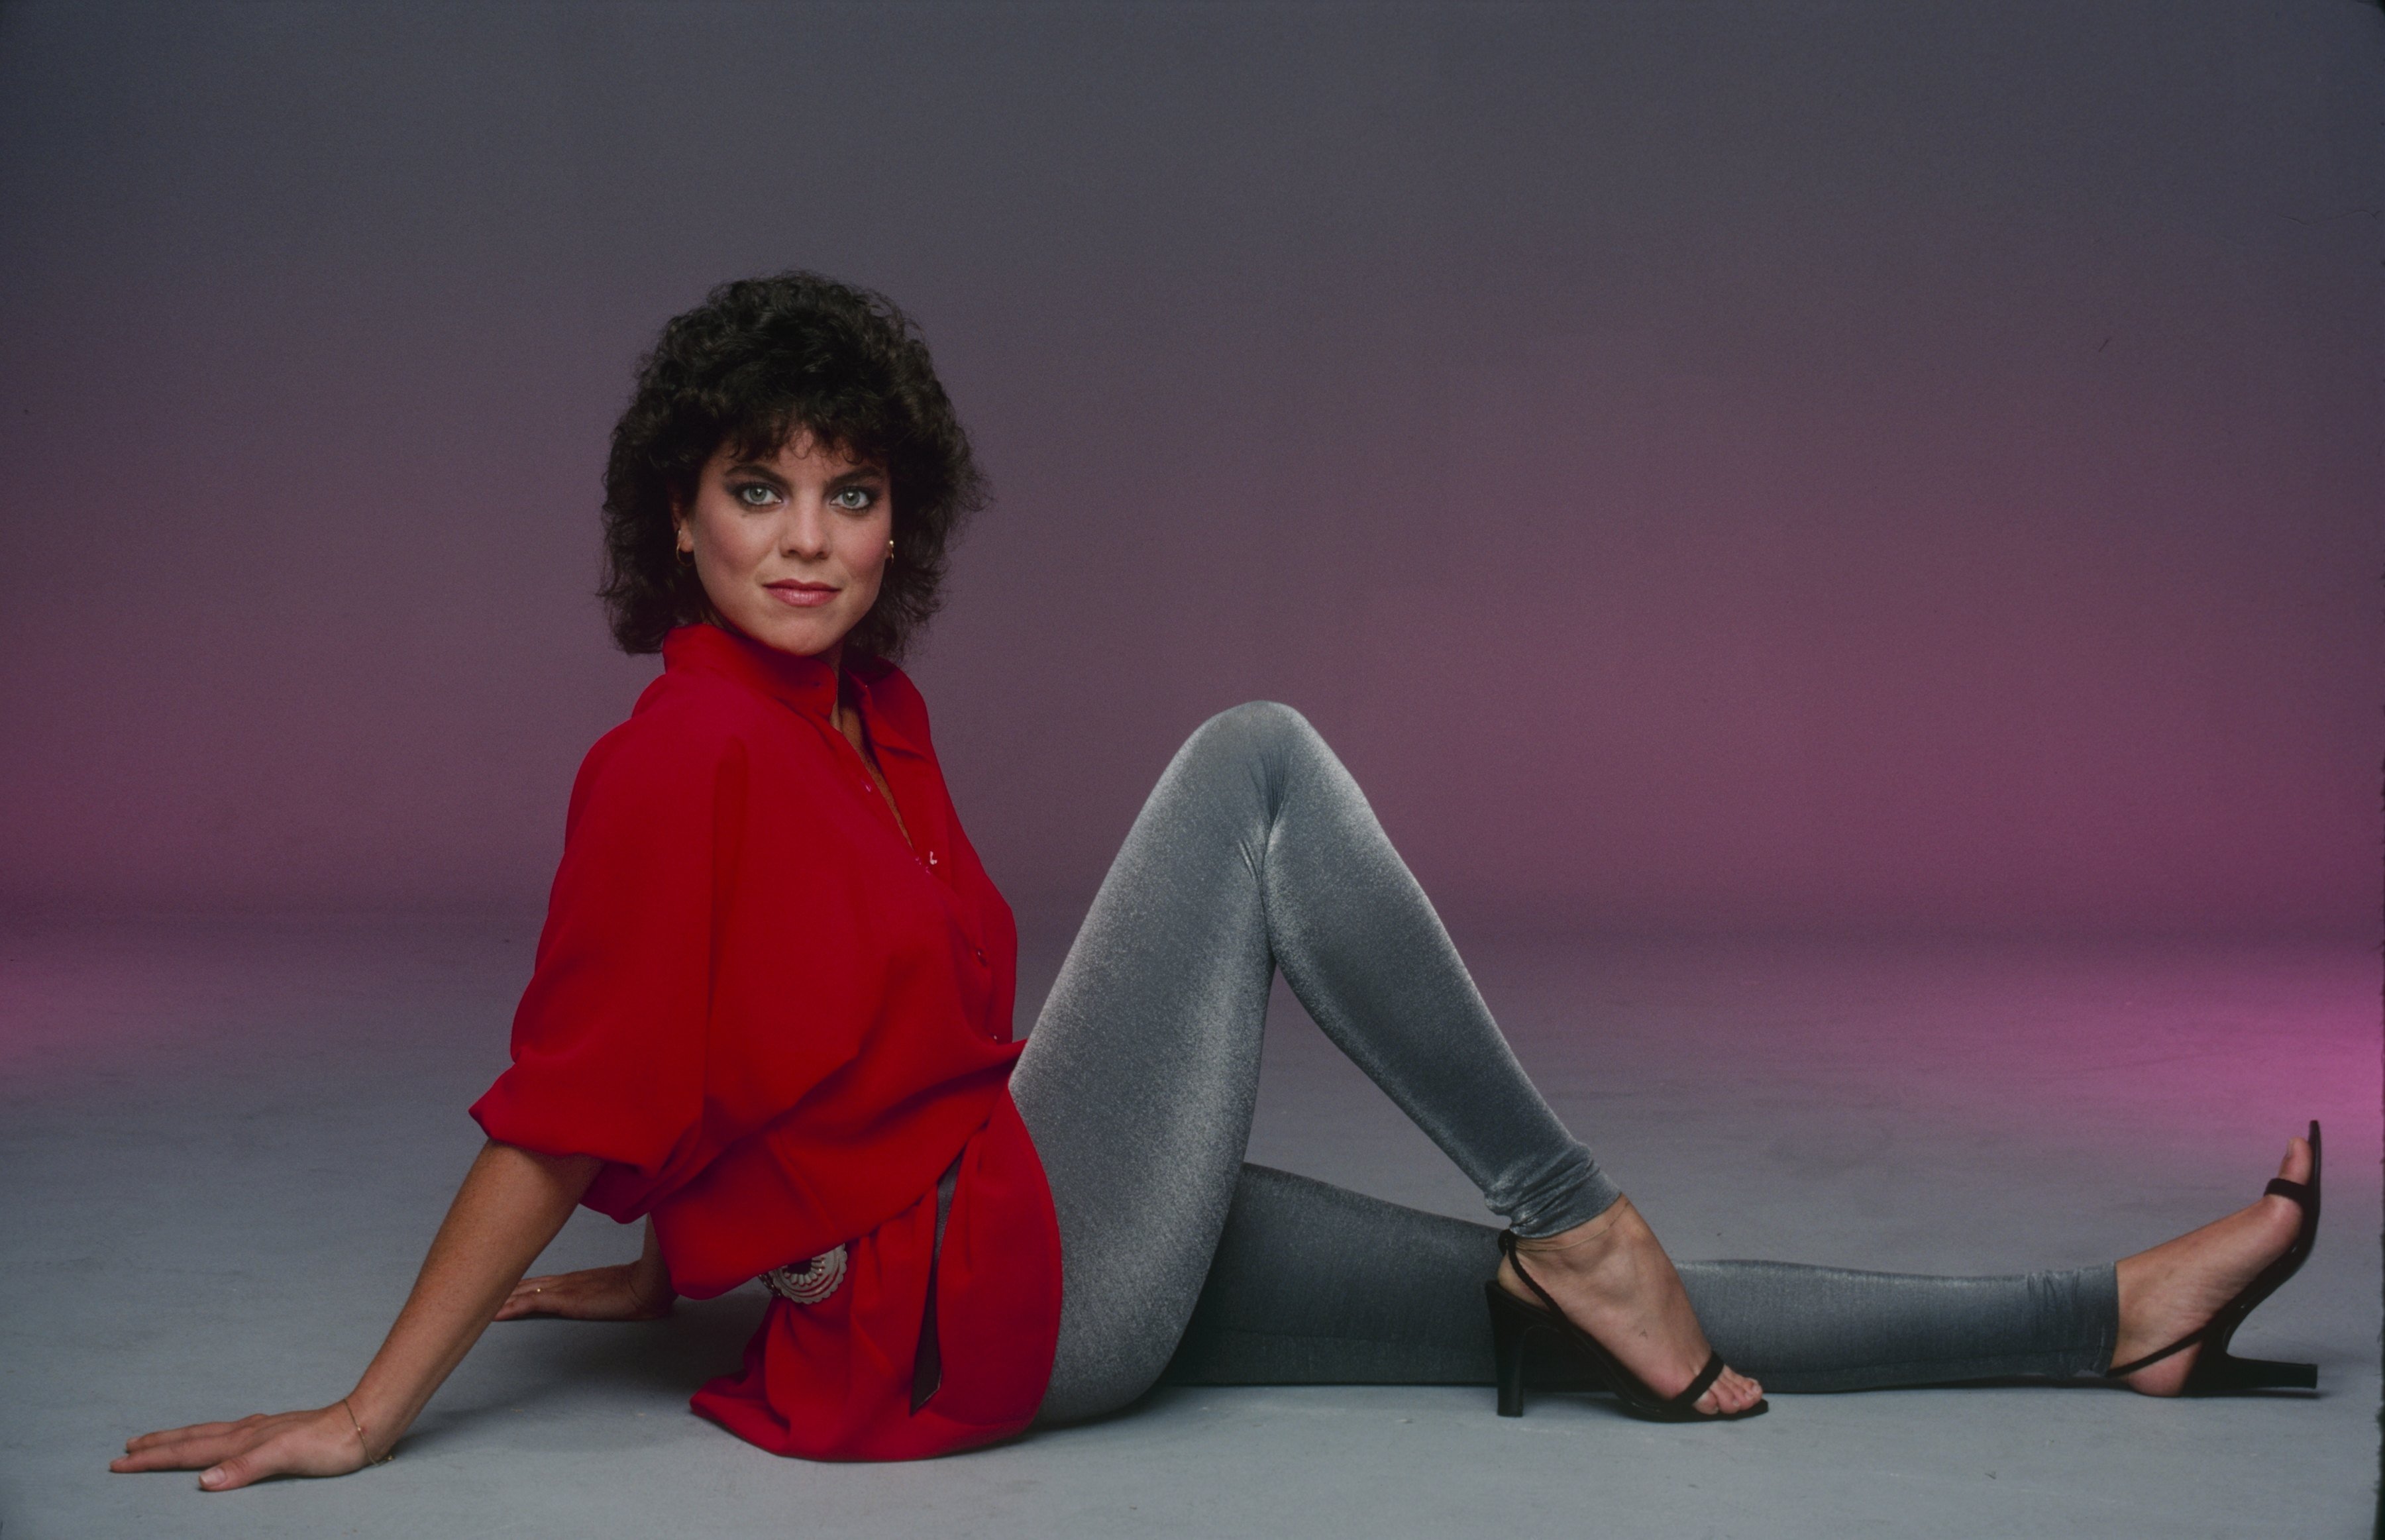 Erin Moran photographed in 1983 in the United States. | Source: Getty Images 